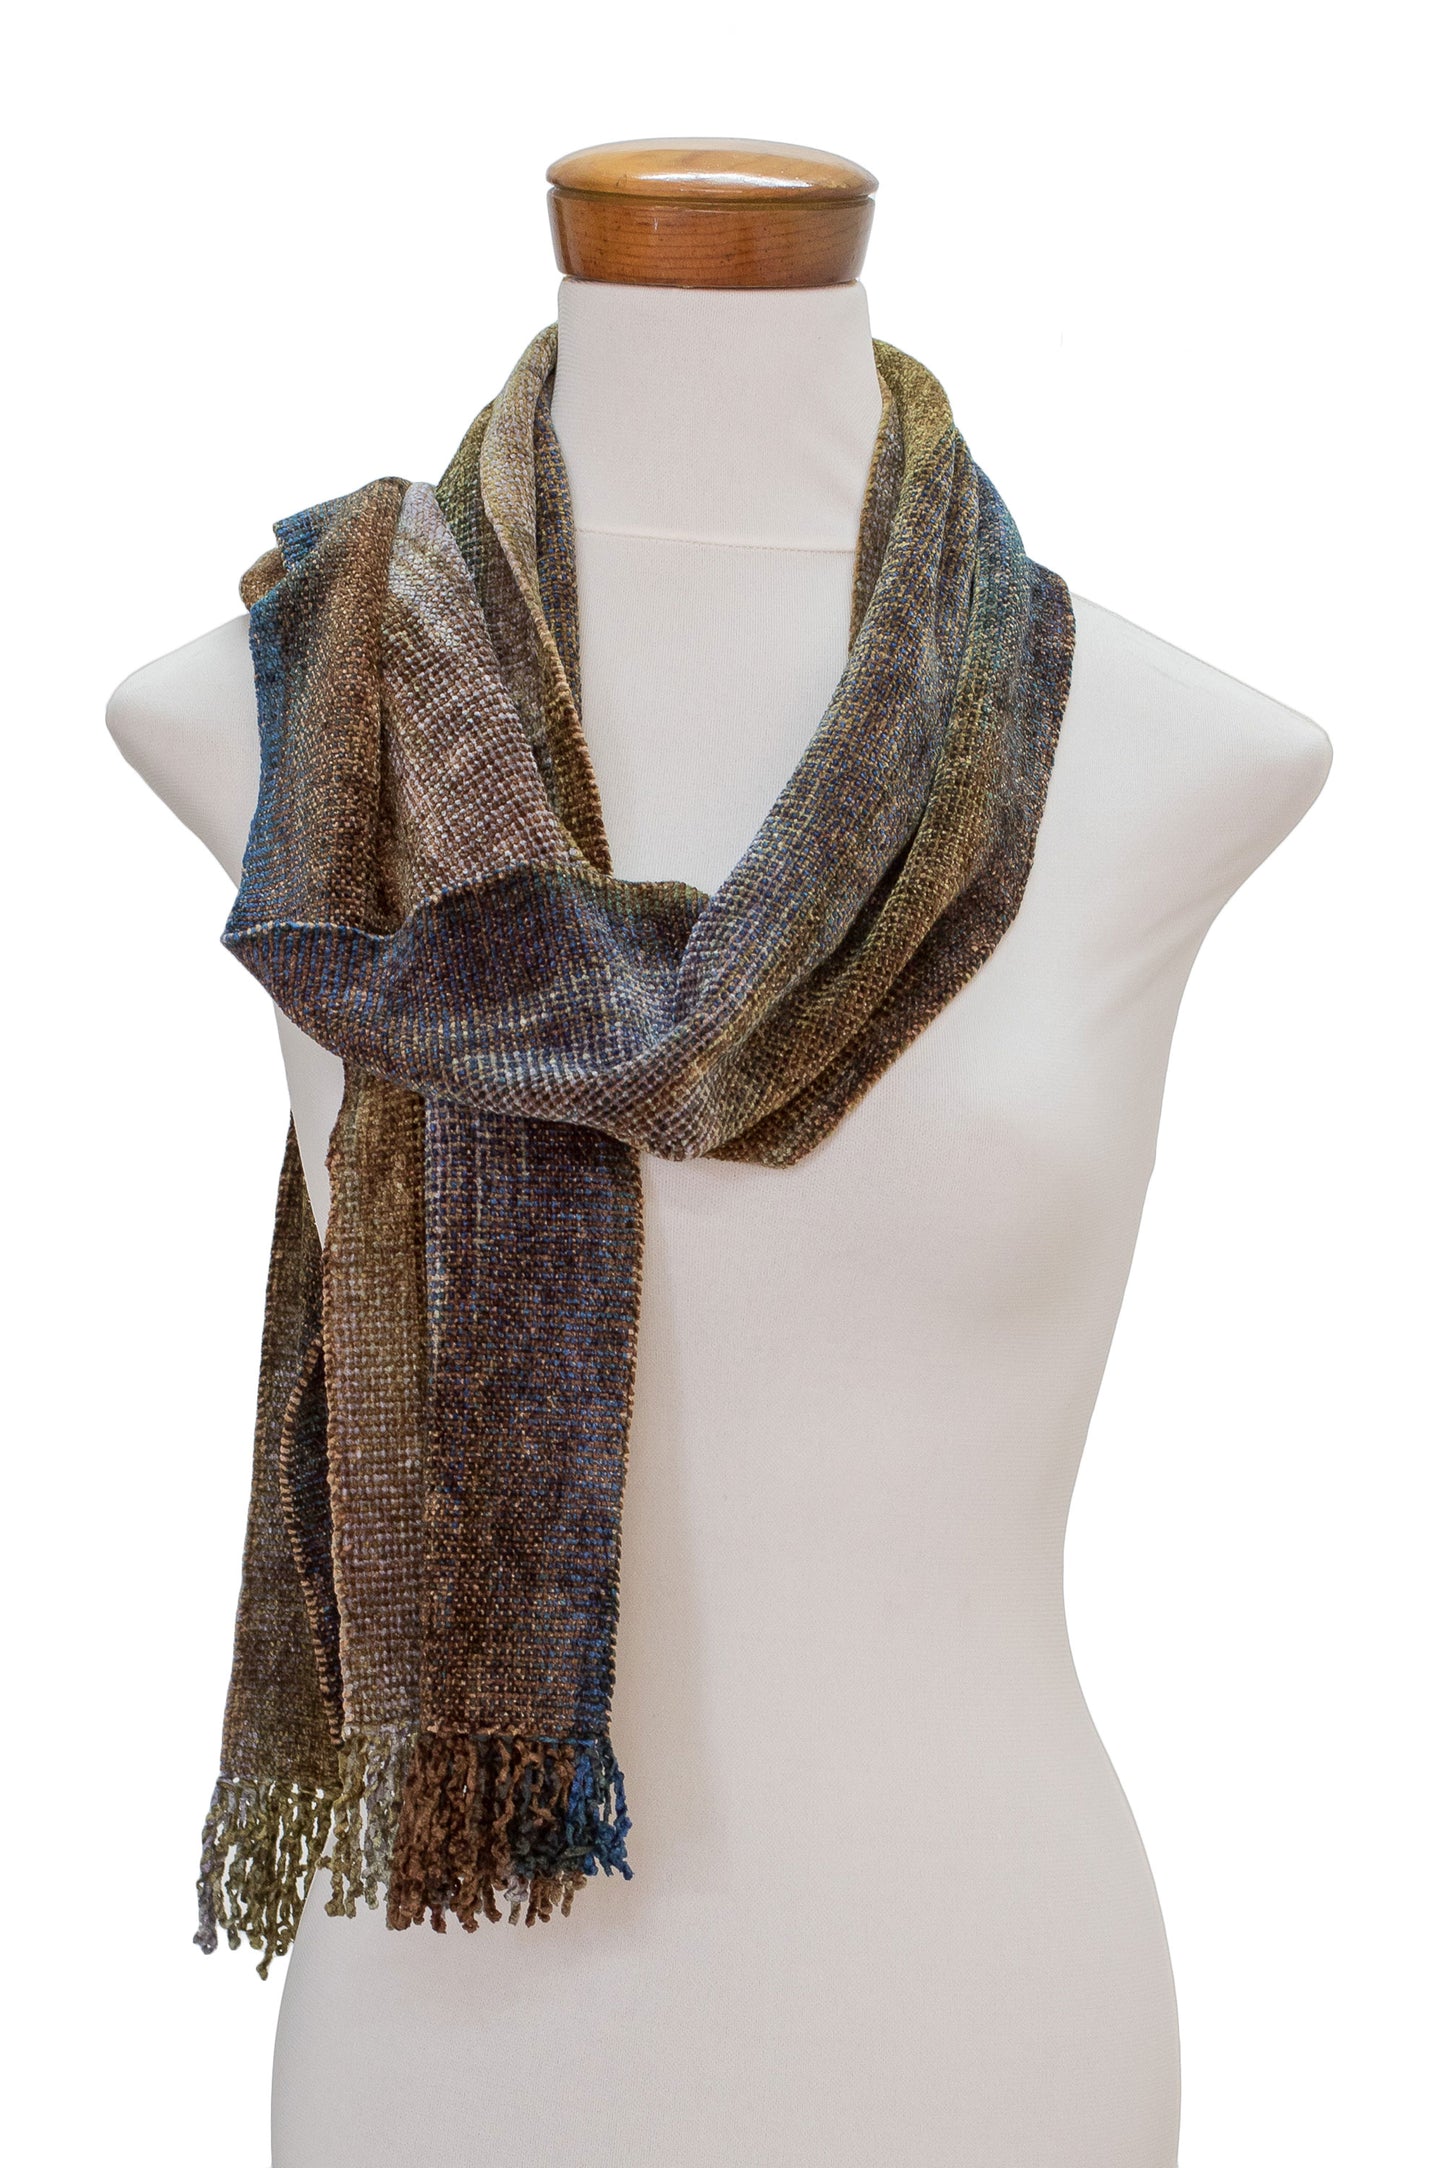 Paths Earth-Tone Rayon Chenille Scarf from Guatemala